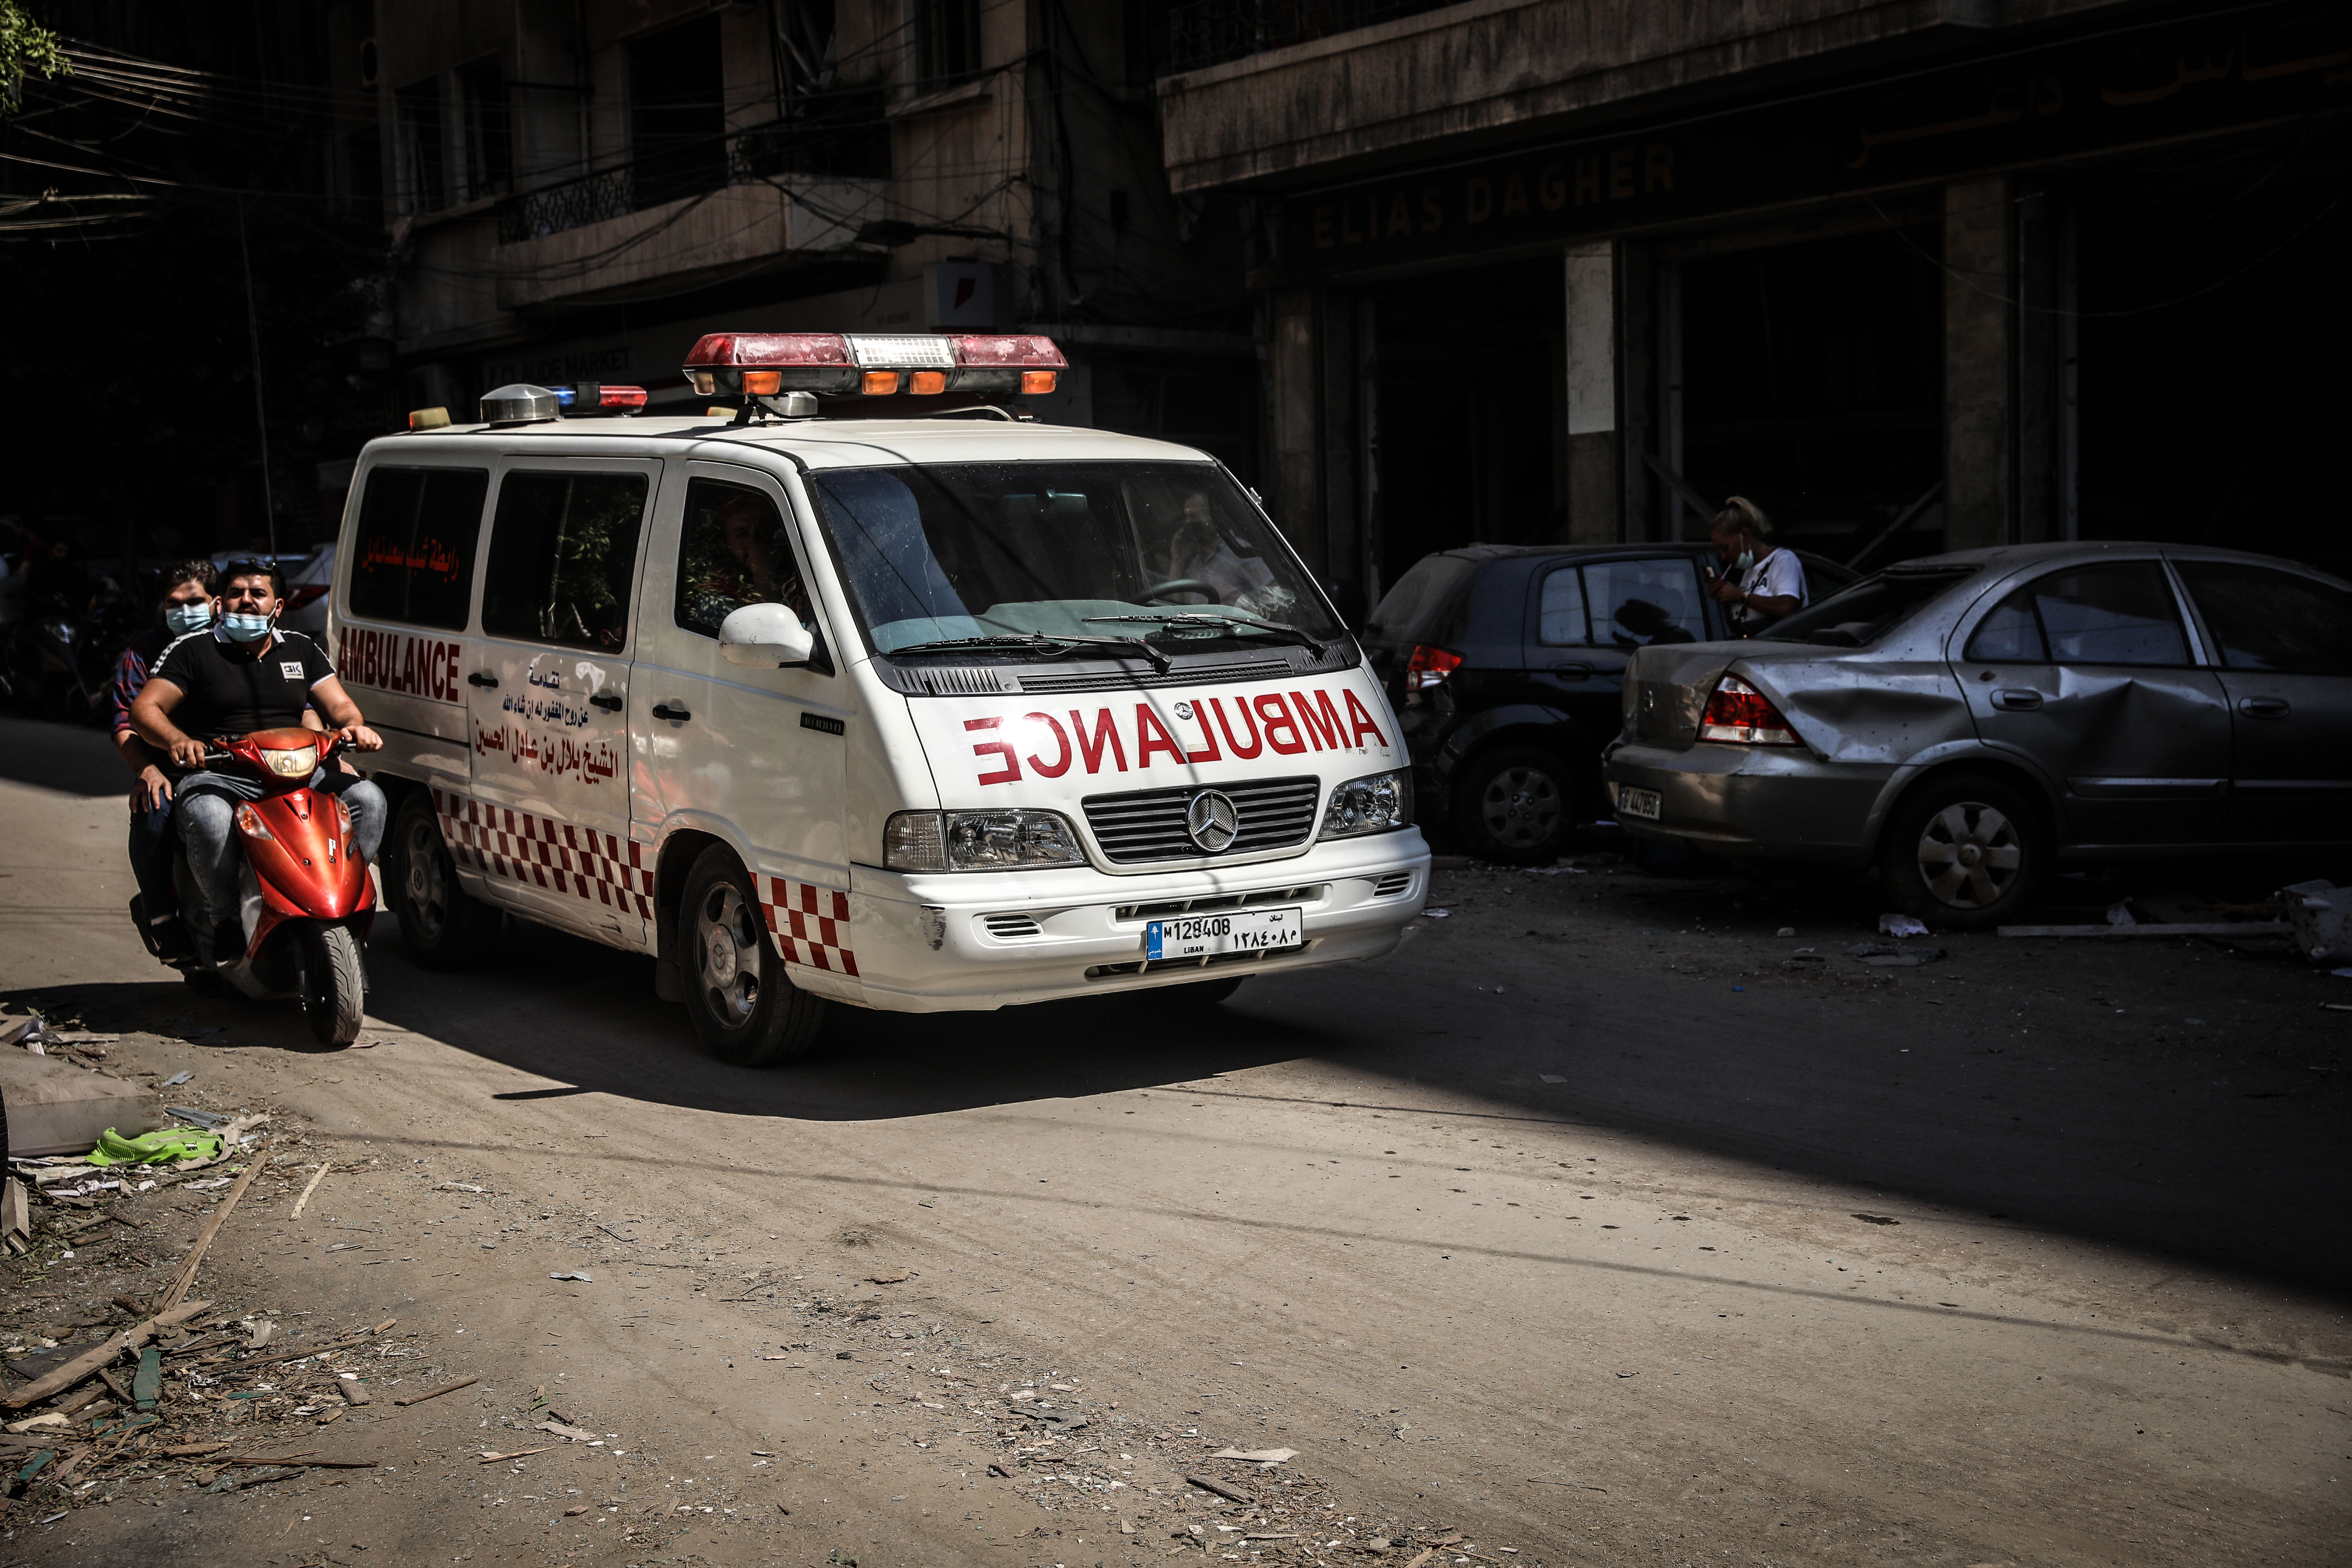 An ambulance is seen in Beirut on August 5.